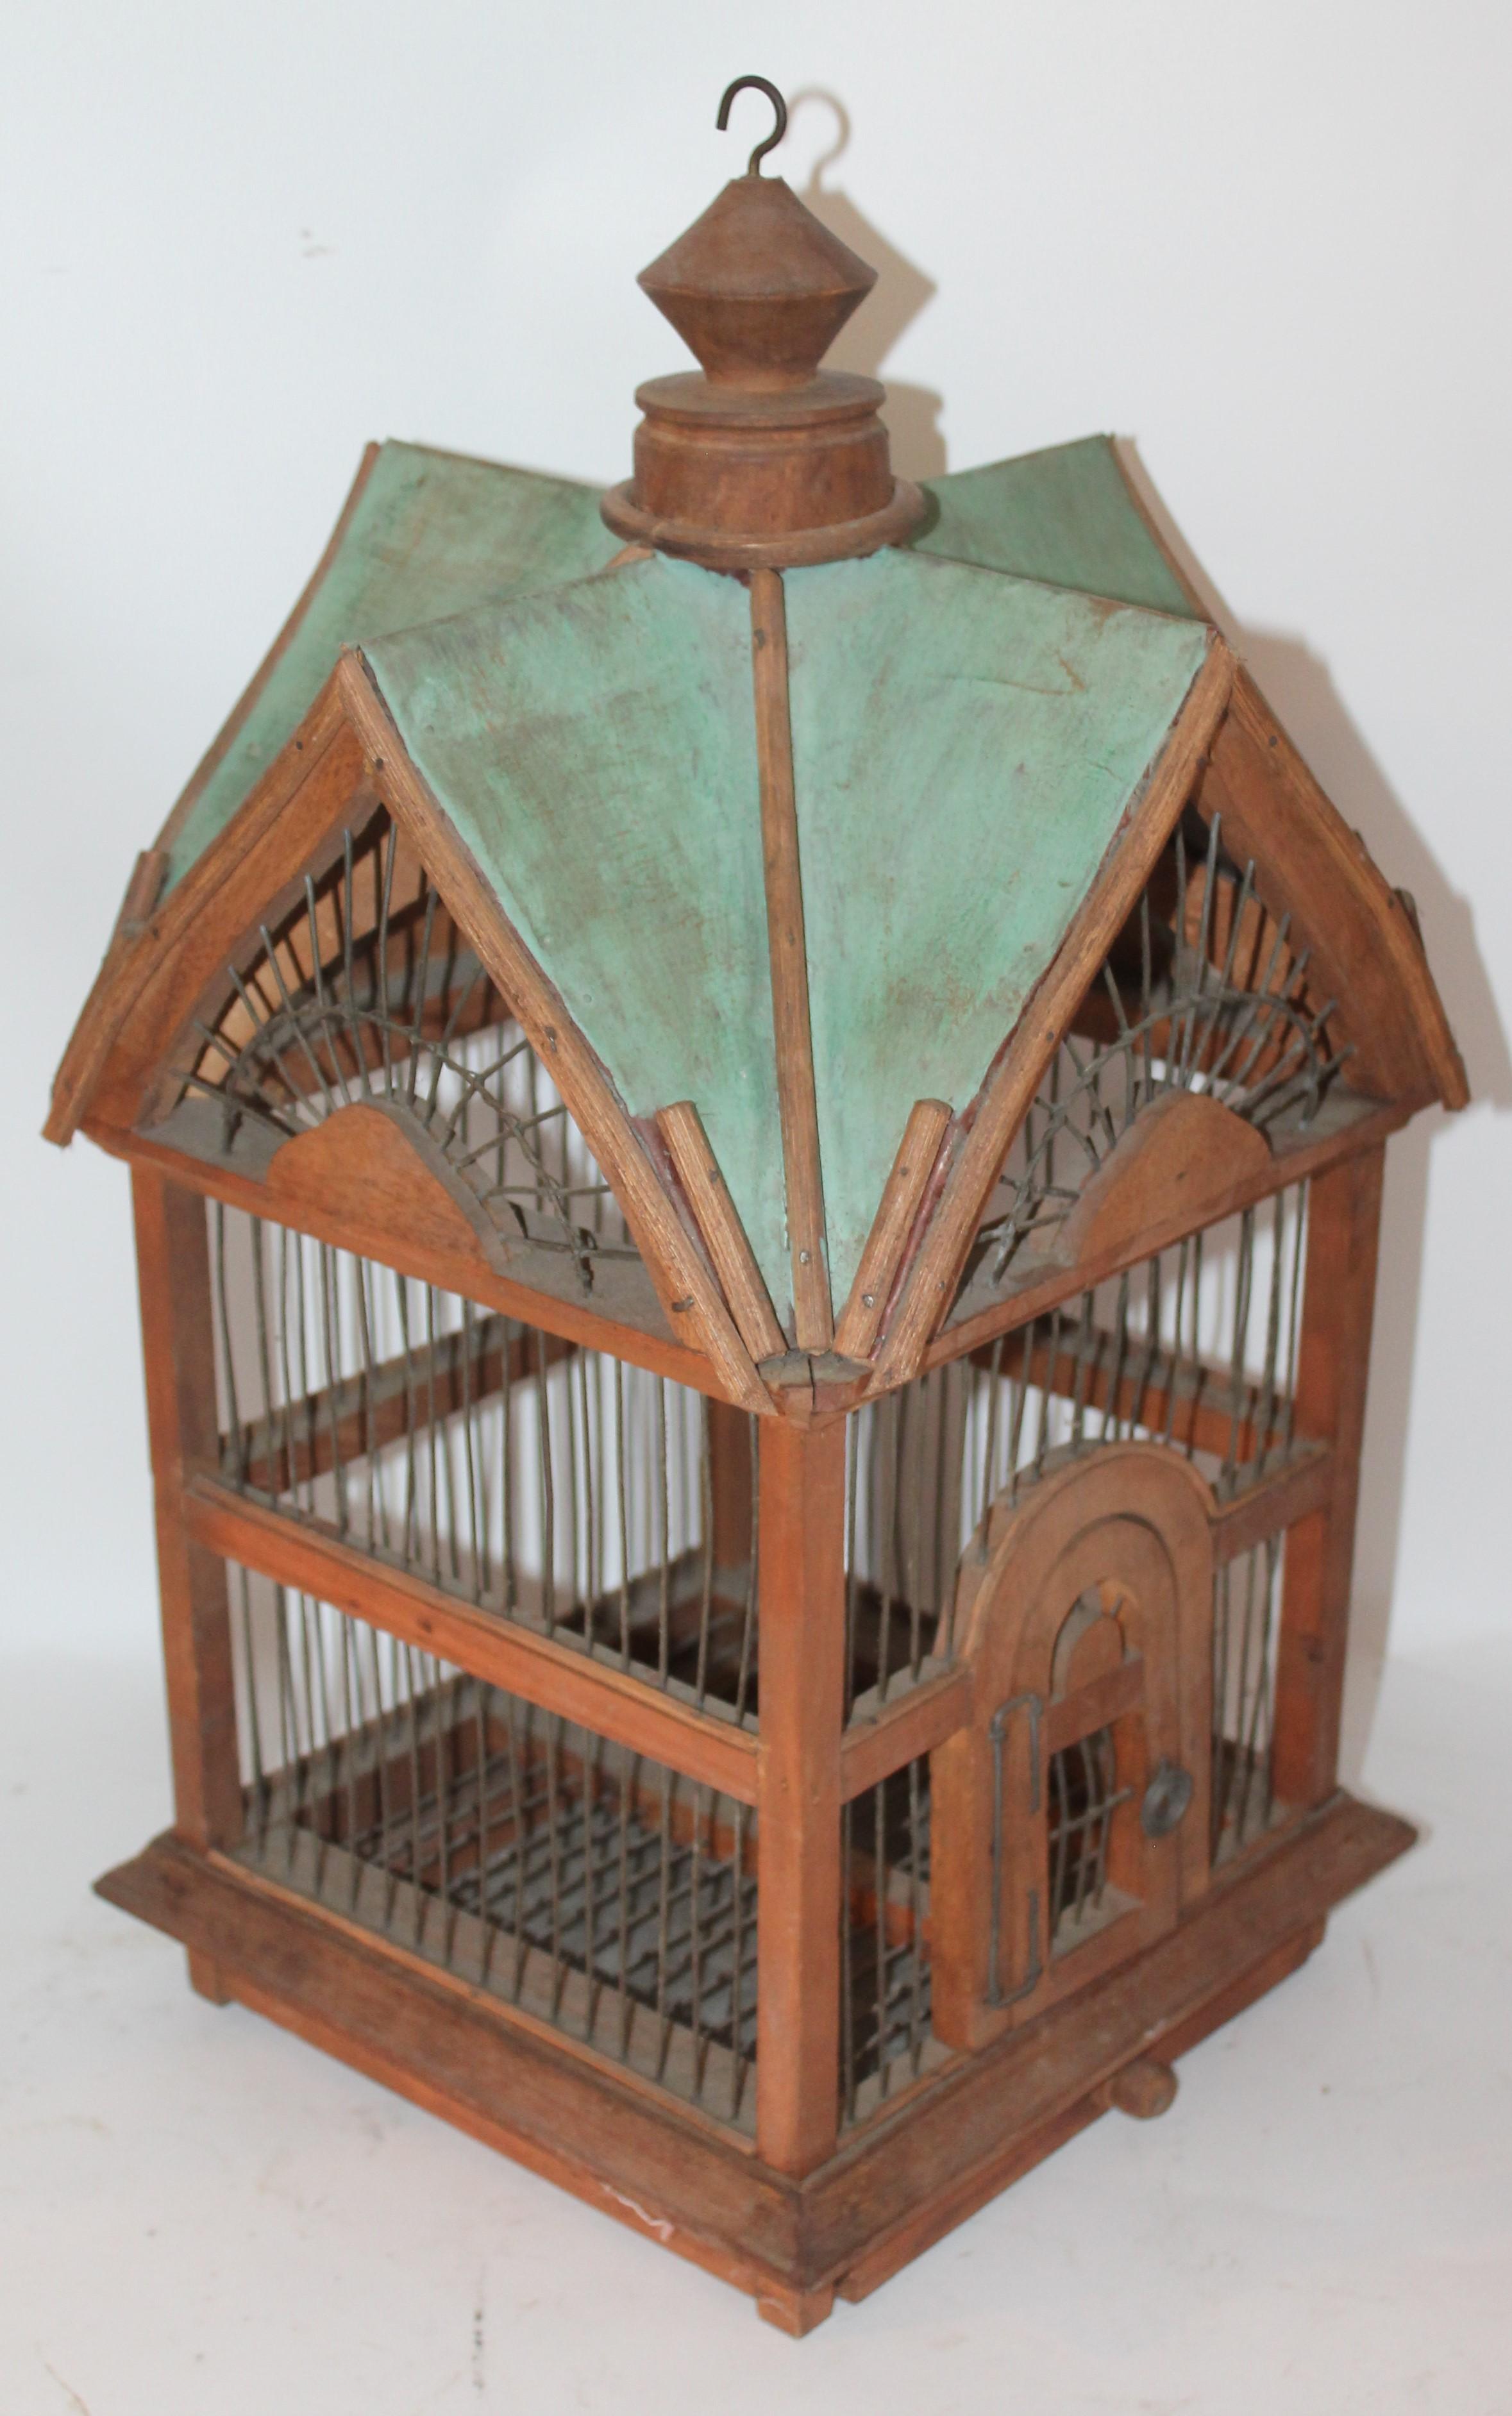 This painted and wire midcentury folky bird house was found in the mid west. The condition is good with wear consistent from age and use.